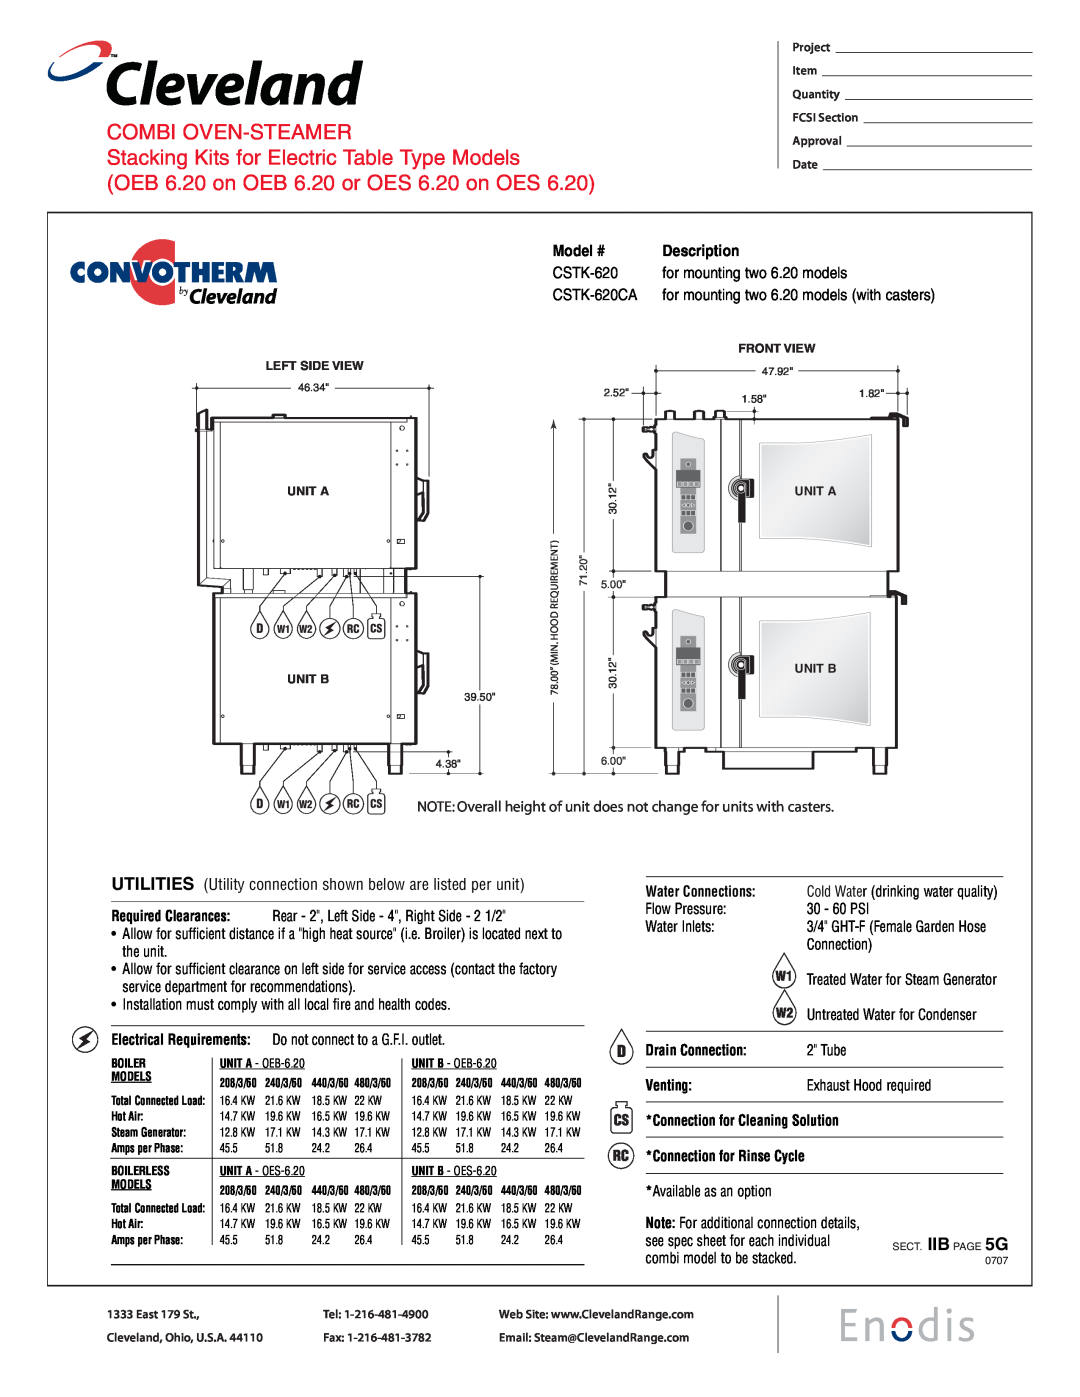 Cleveland Range CSTK-610 OEB 6.20 on OEB 6.20 or OES 6.20 on OES, Tube, Exhaust Hood required, Available as an option 